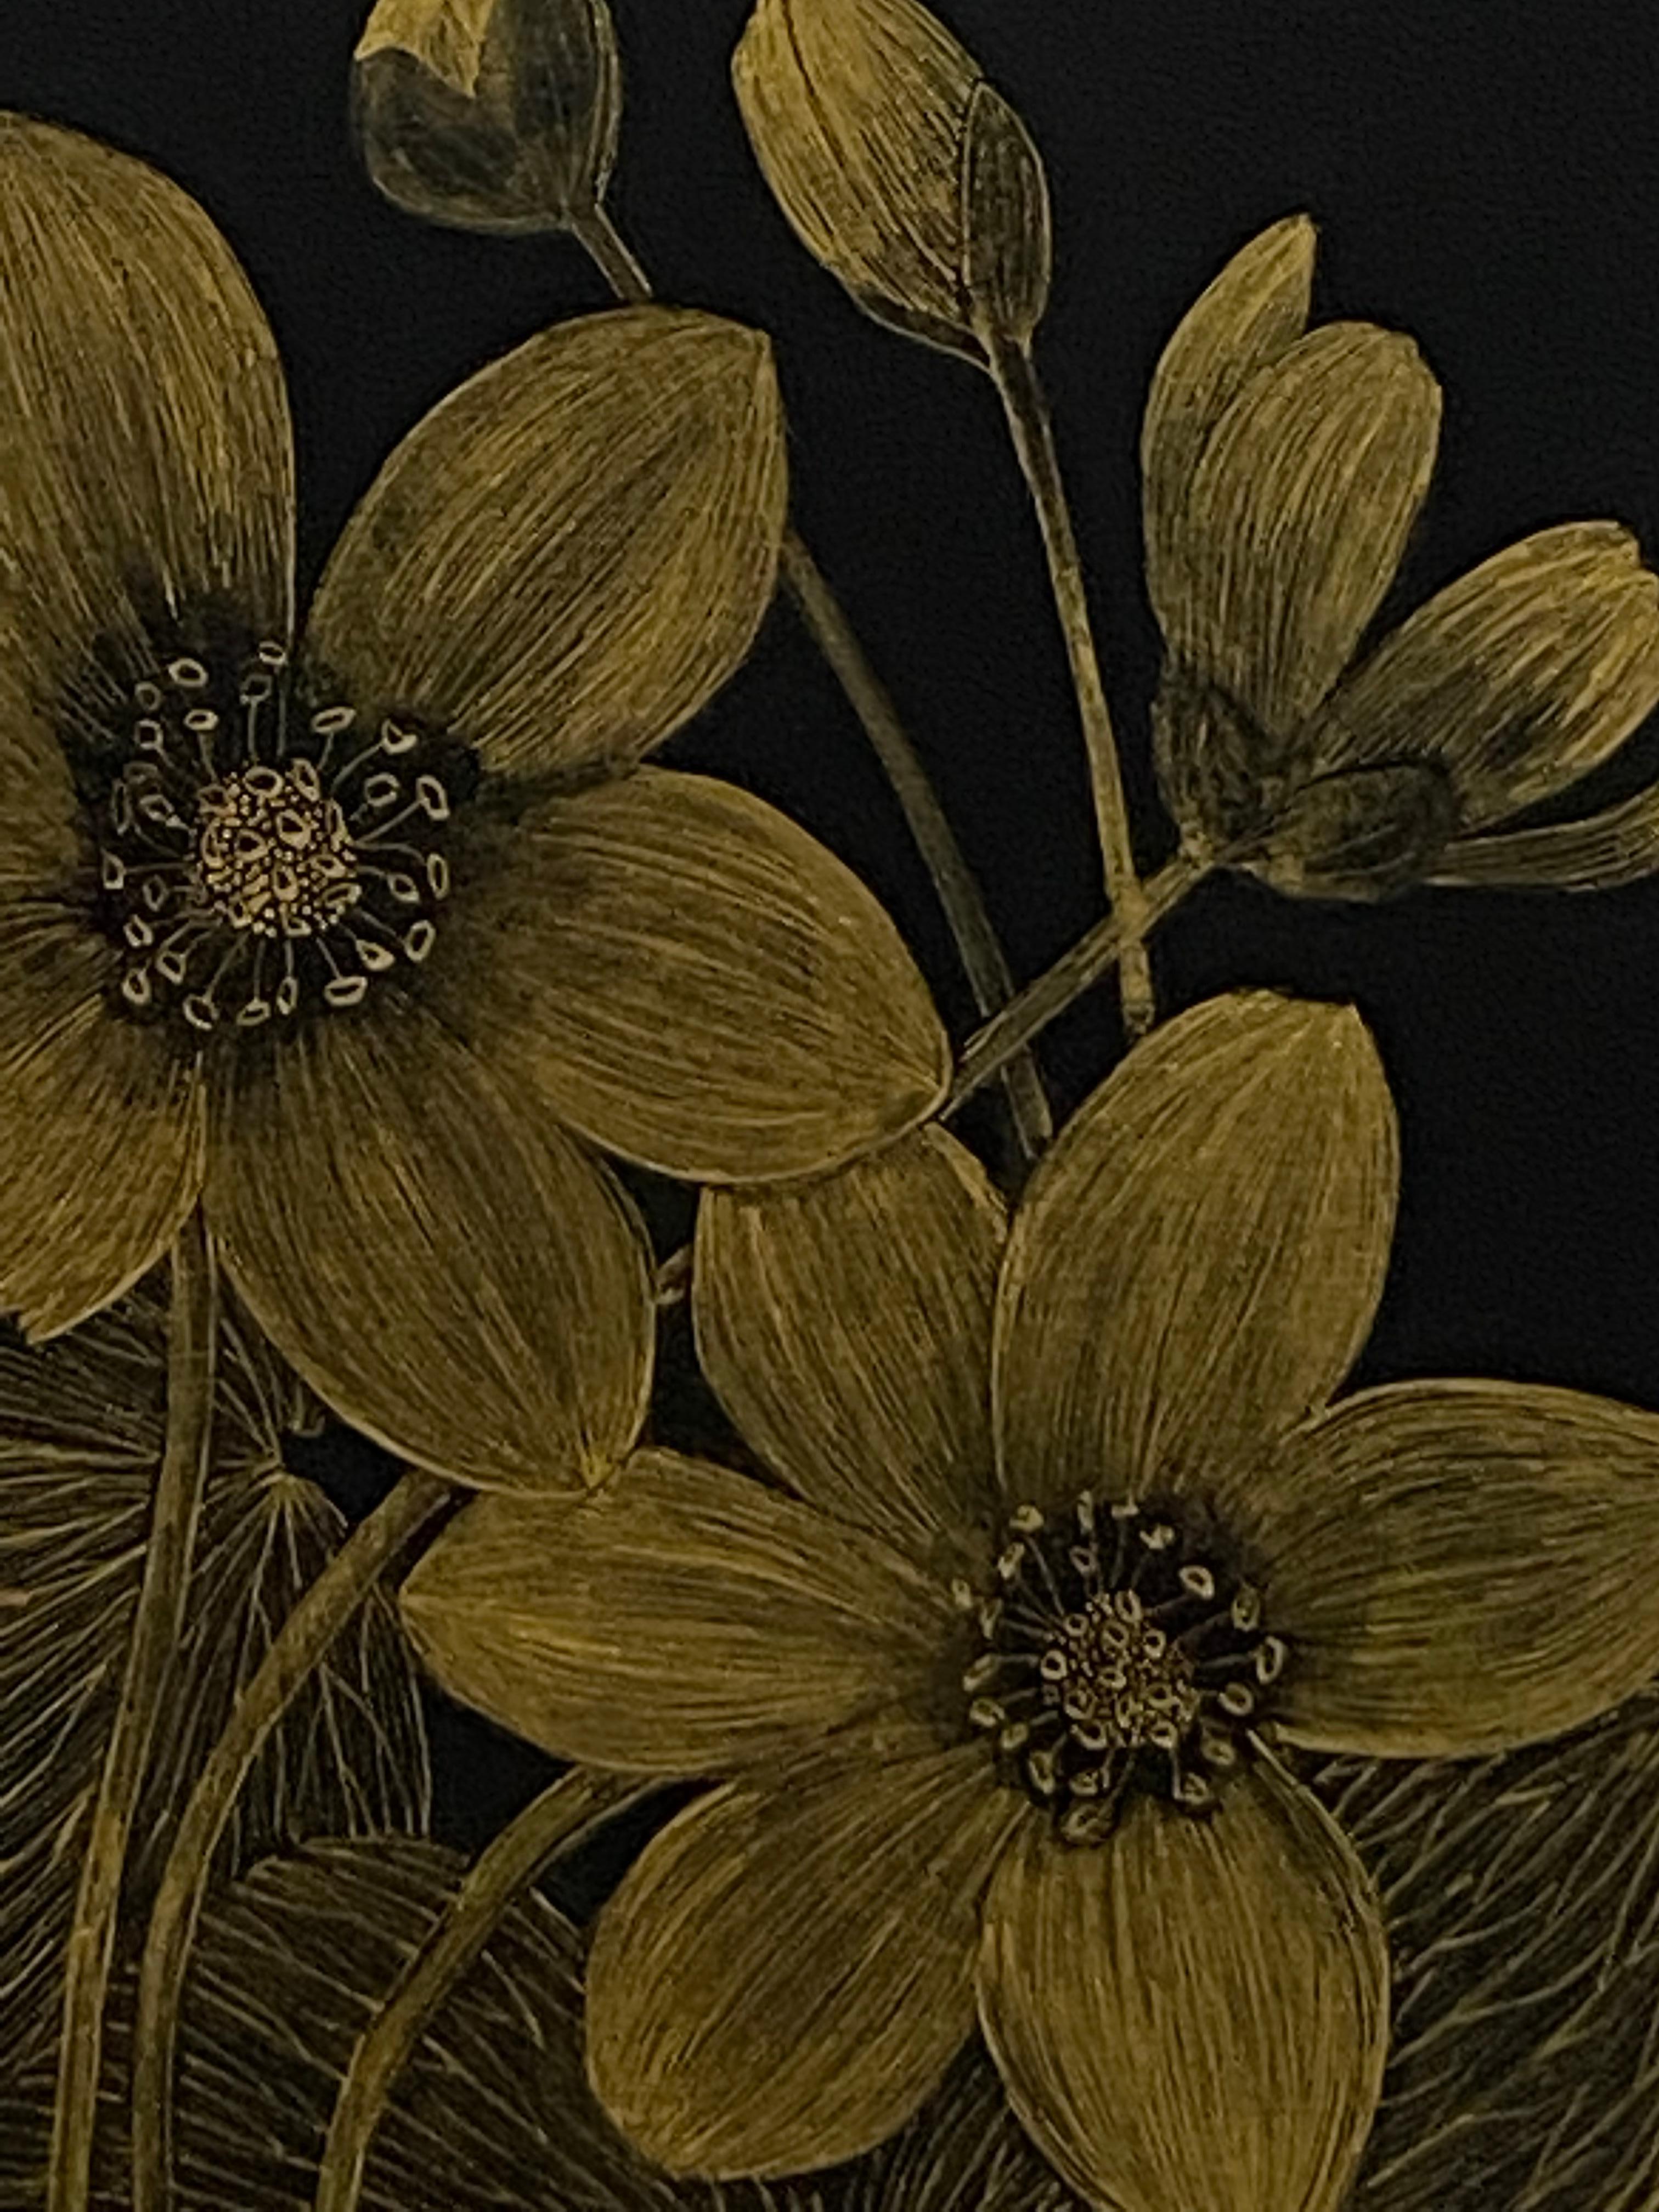 Anemone One, Botanical Painting, Gold Flowers, Leaves, Stem, Buds on Black Panel For Sale 1